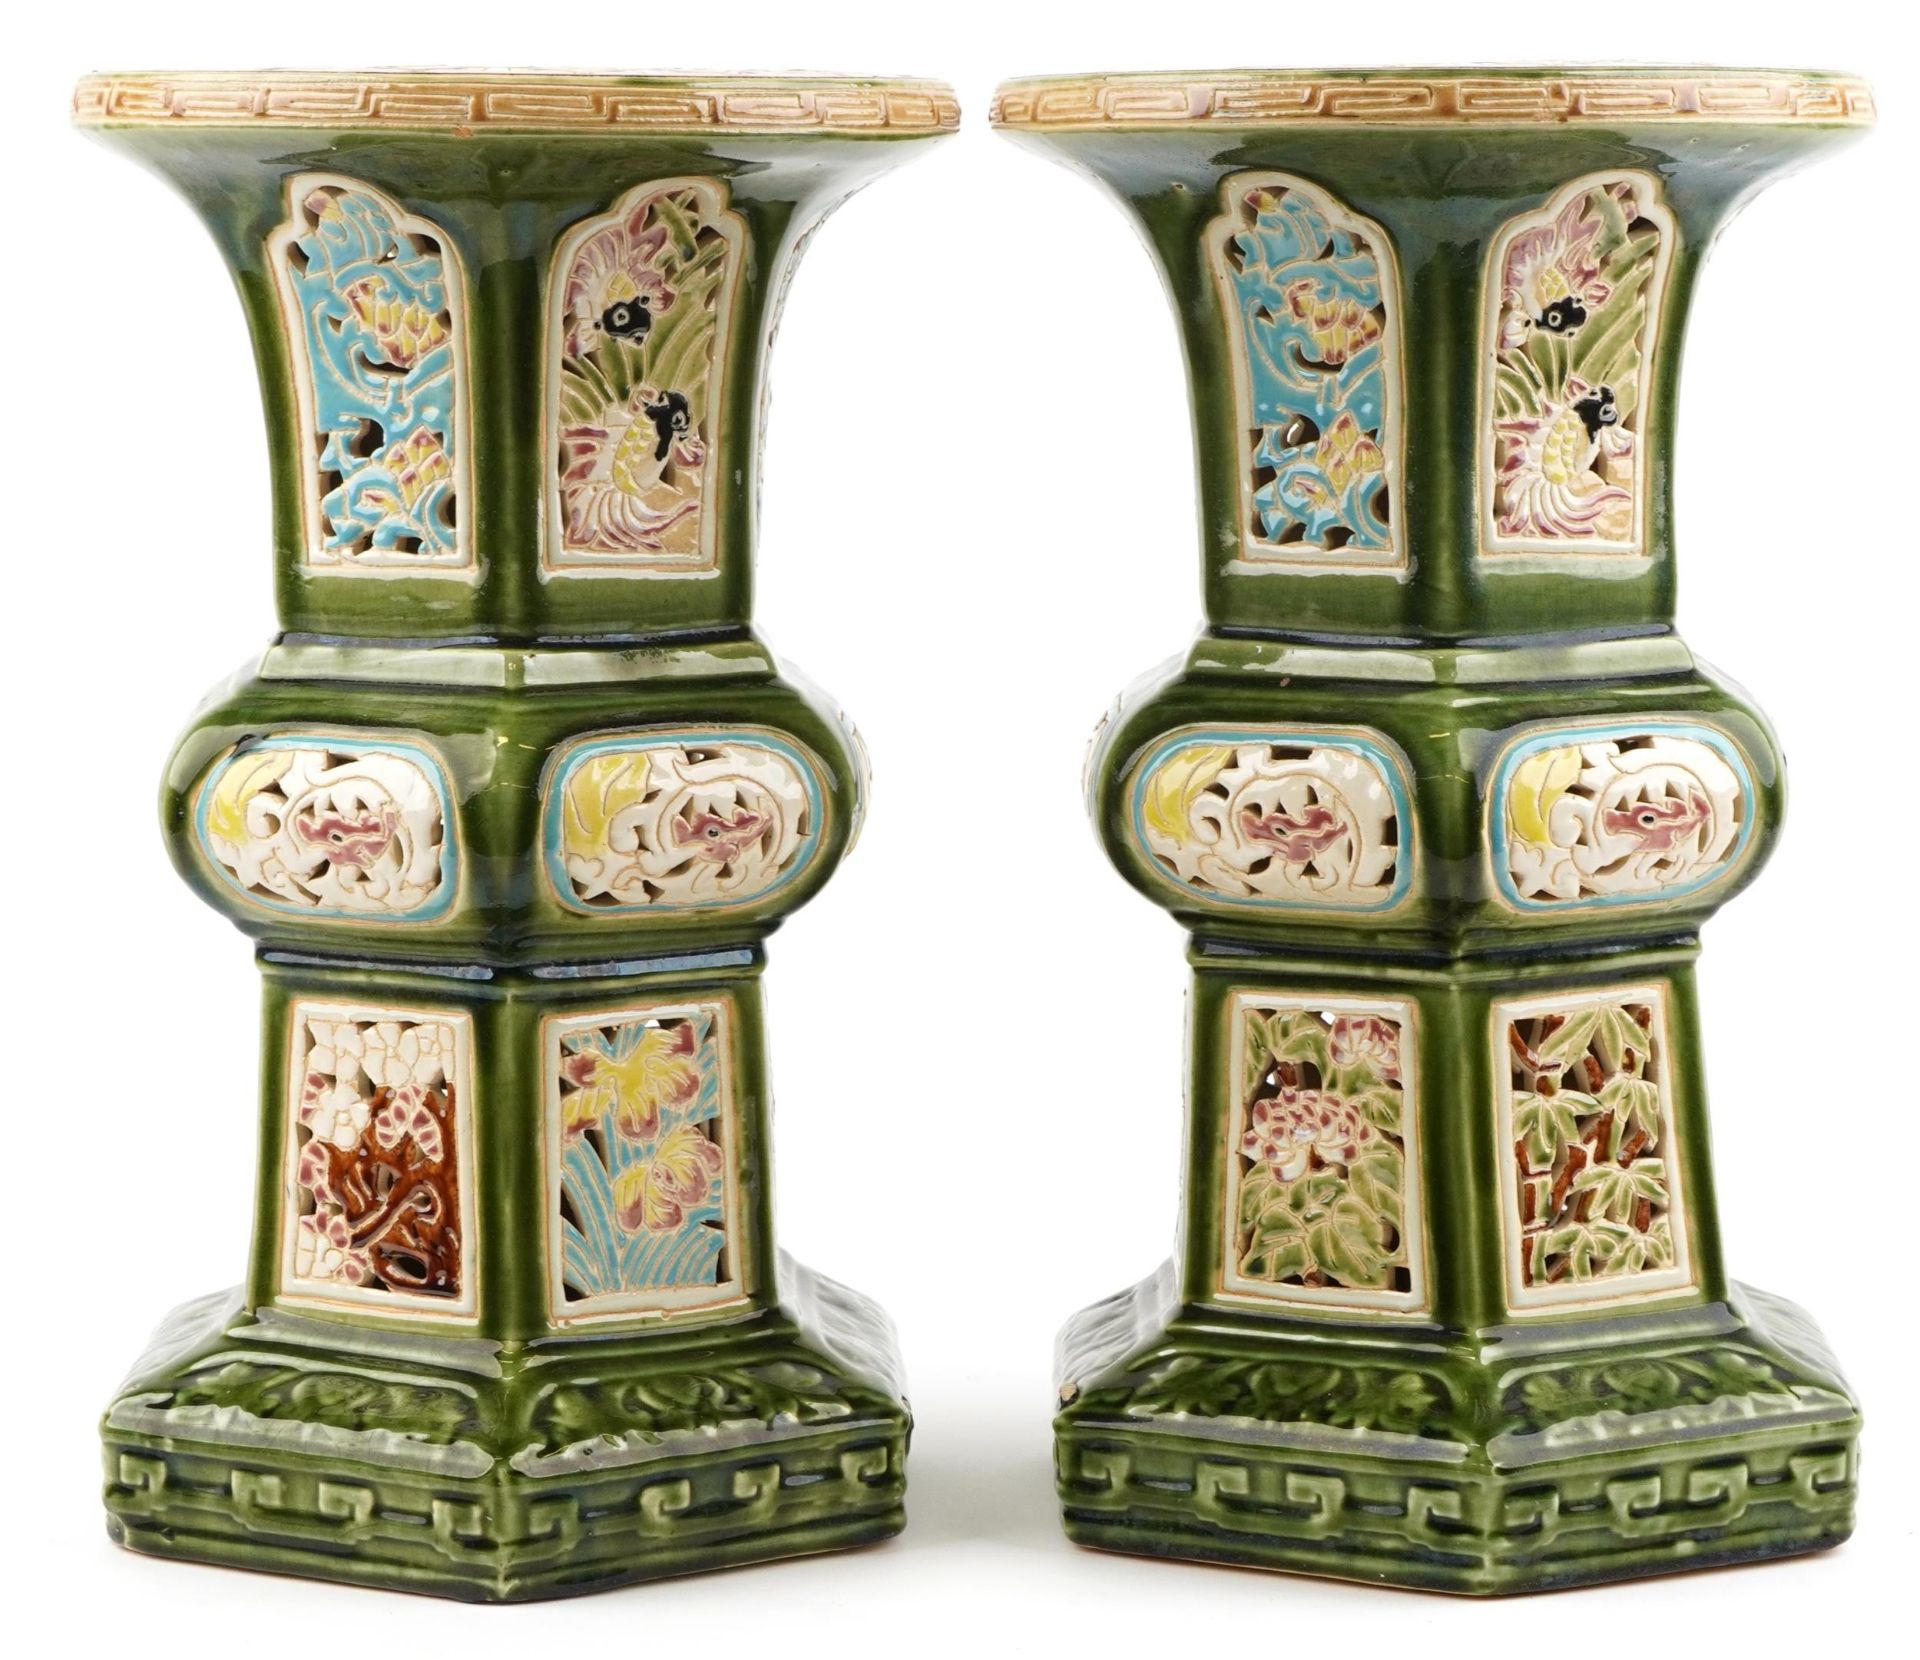 Pair of Chinese pierced porcelain archaic style garden seats each hand painted with flowers having - Image 2 of 7